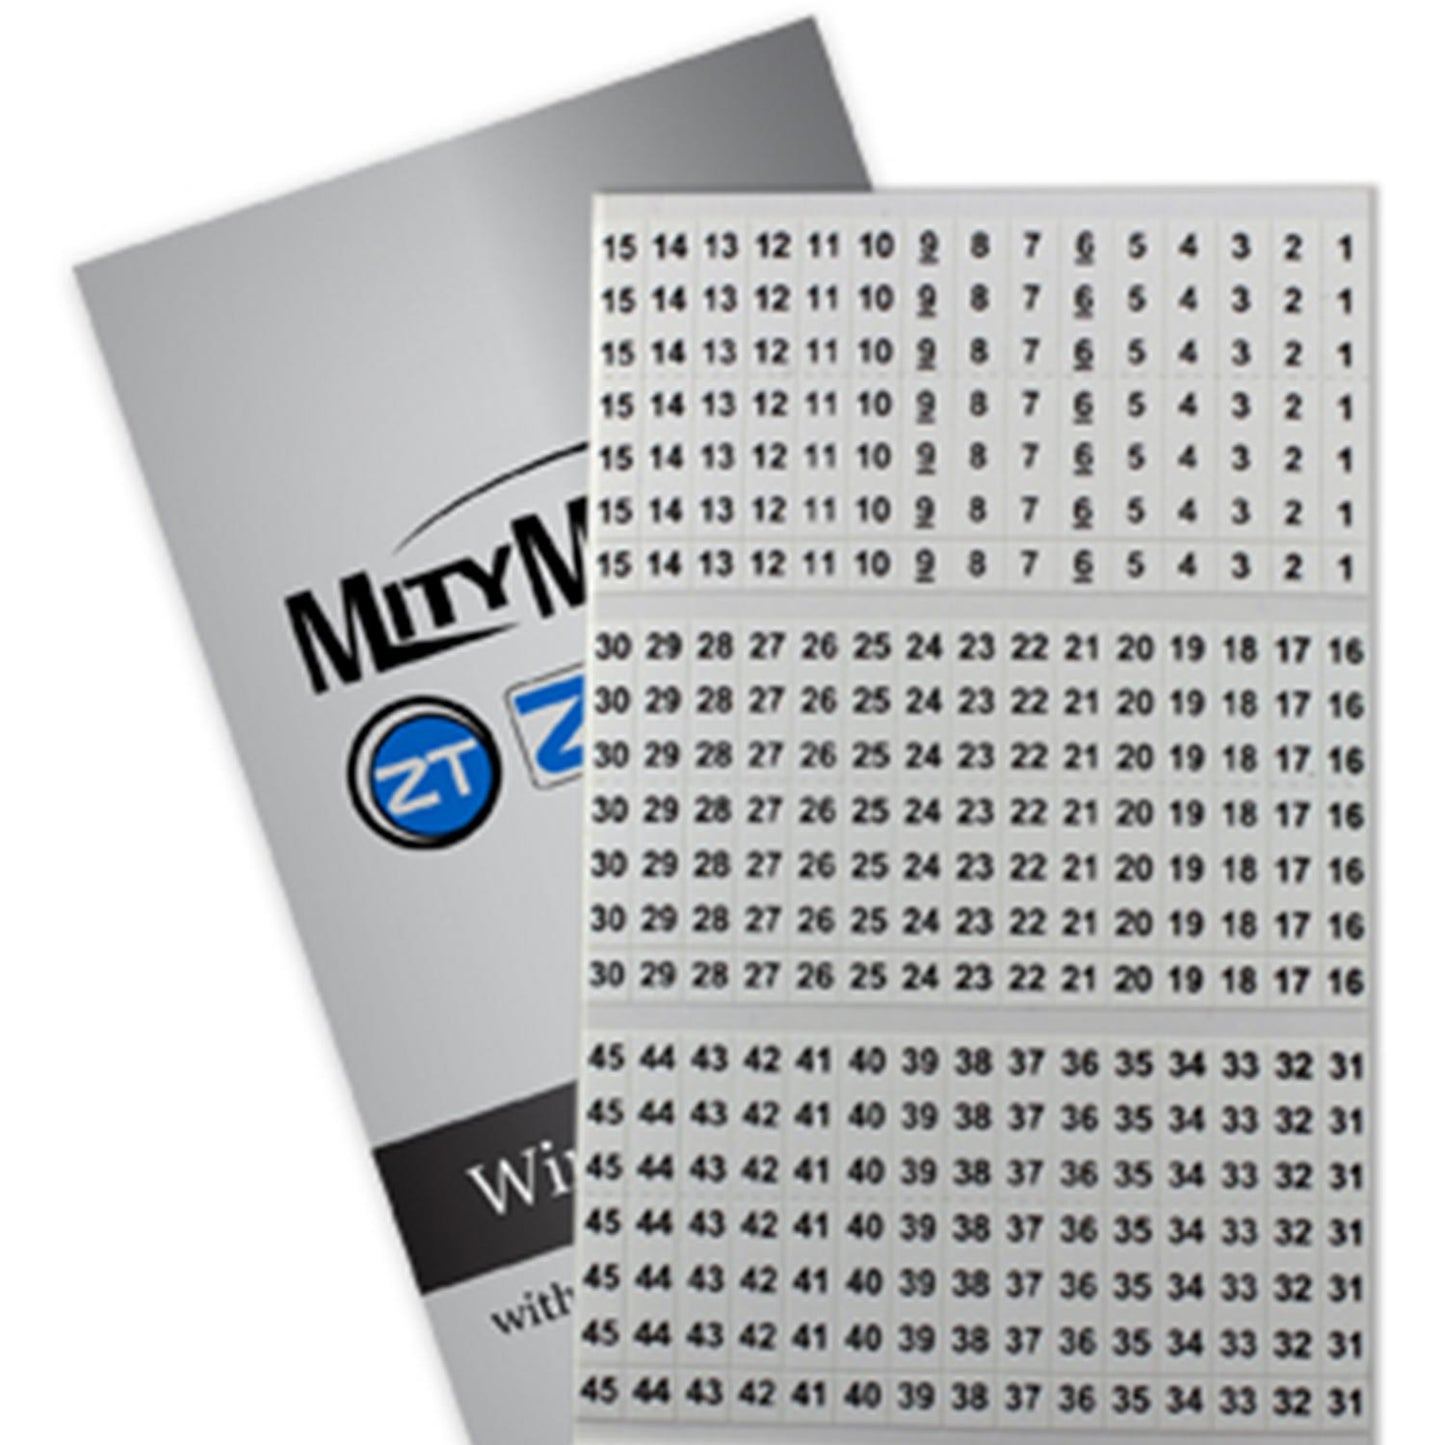 MMB-C wire marker booklet